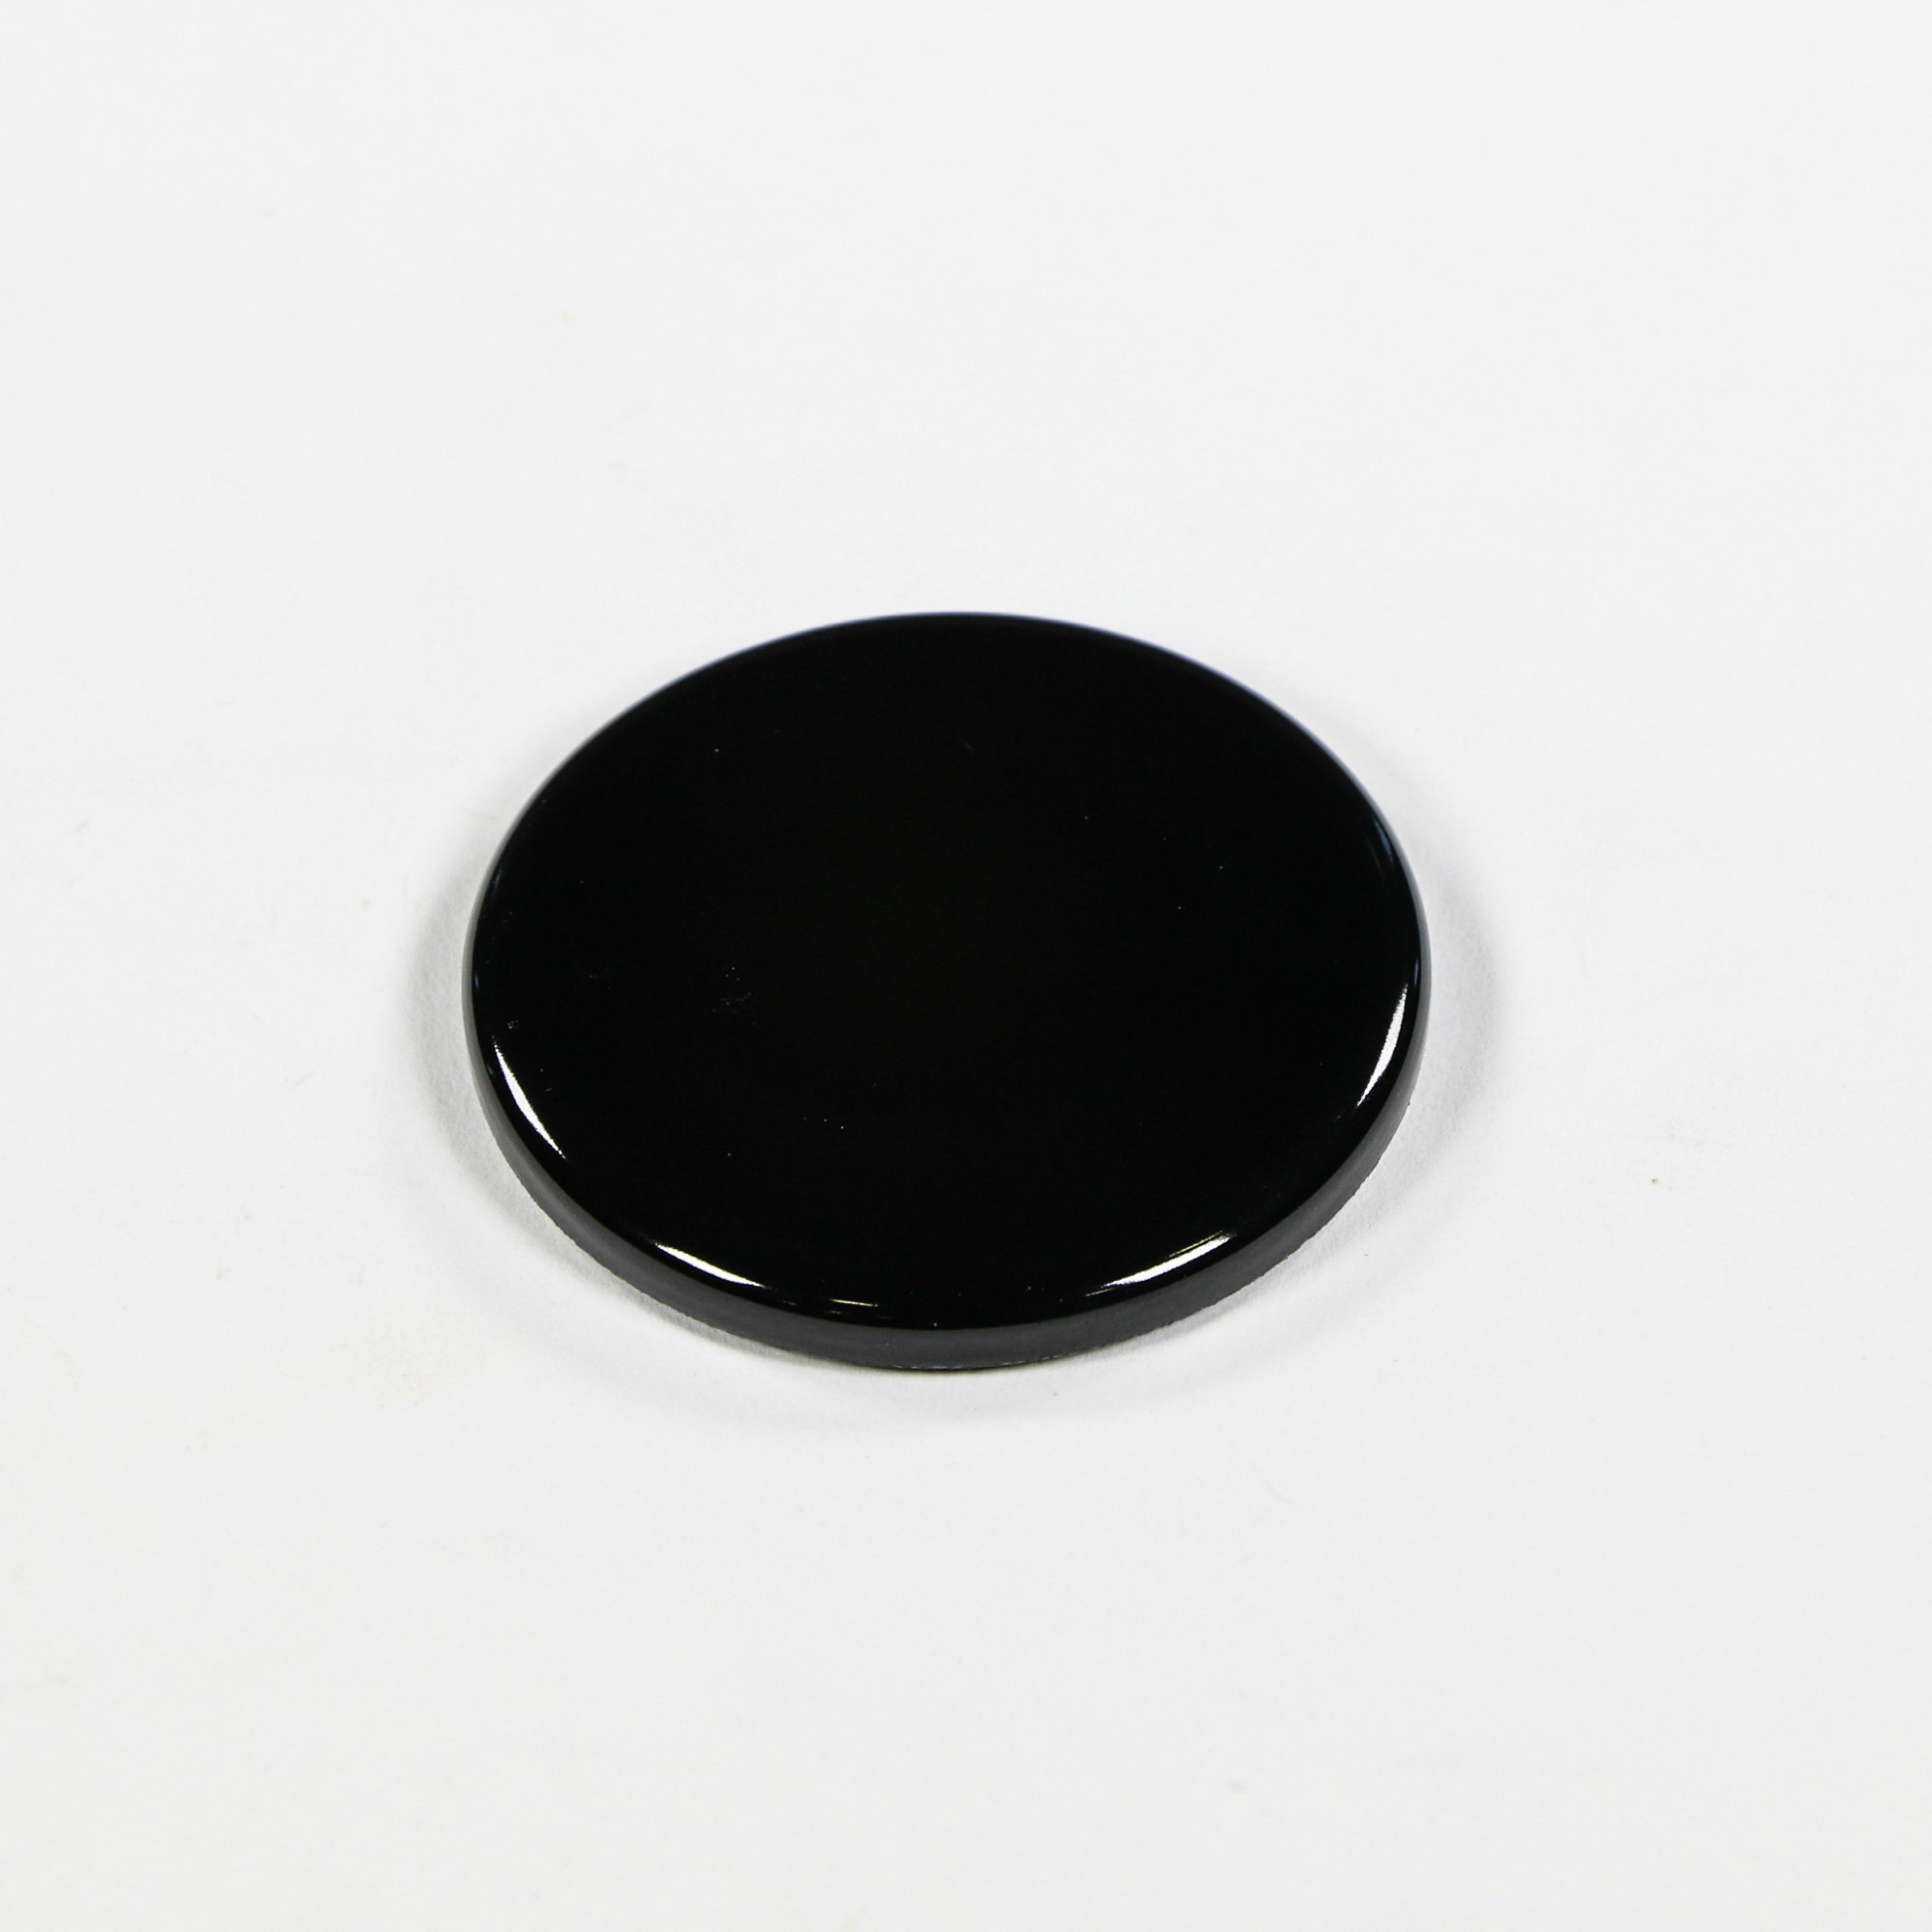  Frigidaire Gas Stove Burner Caps for Large Space